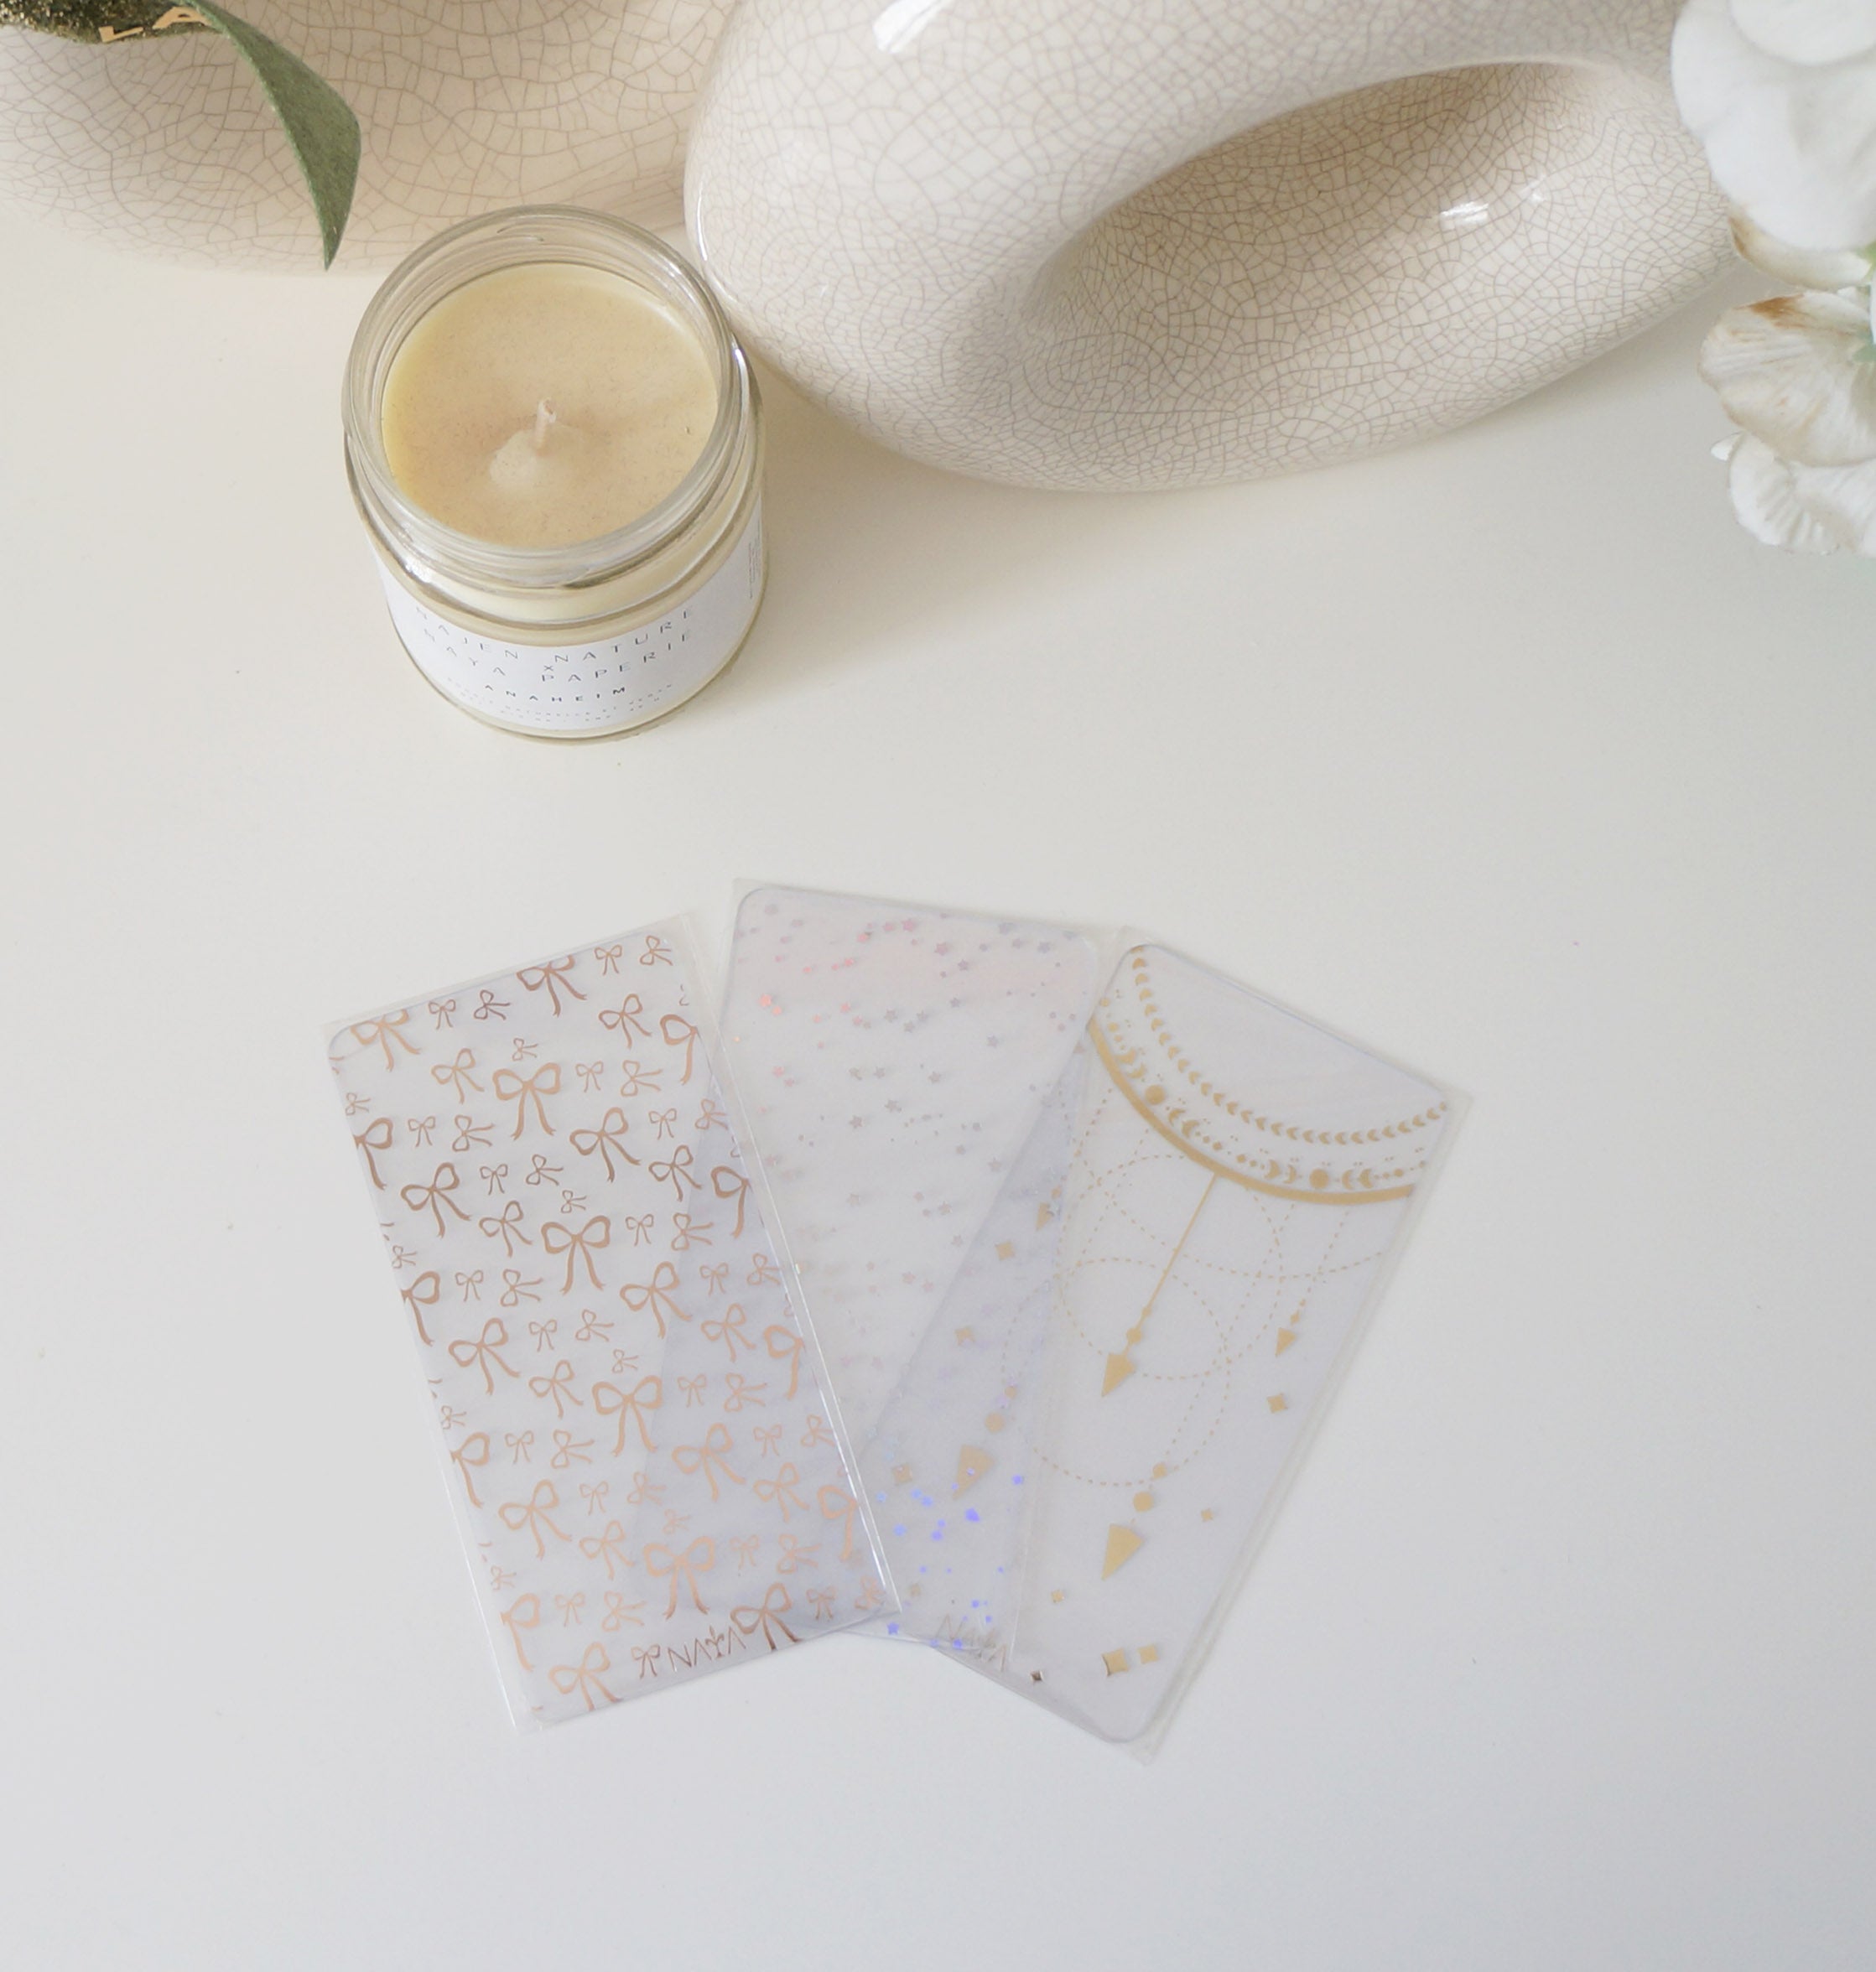 Foiled washis cards